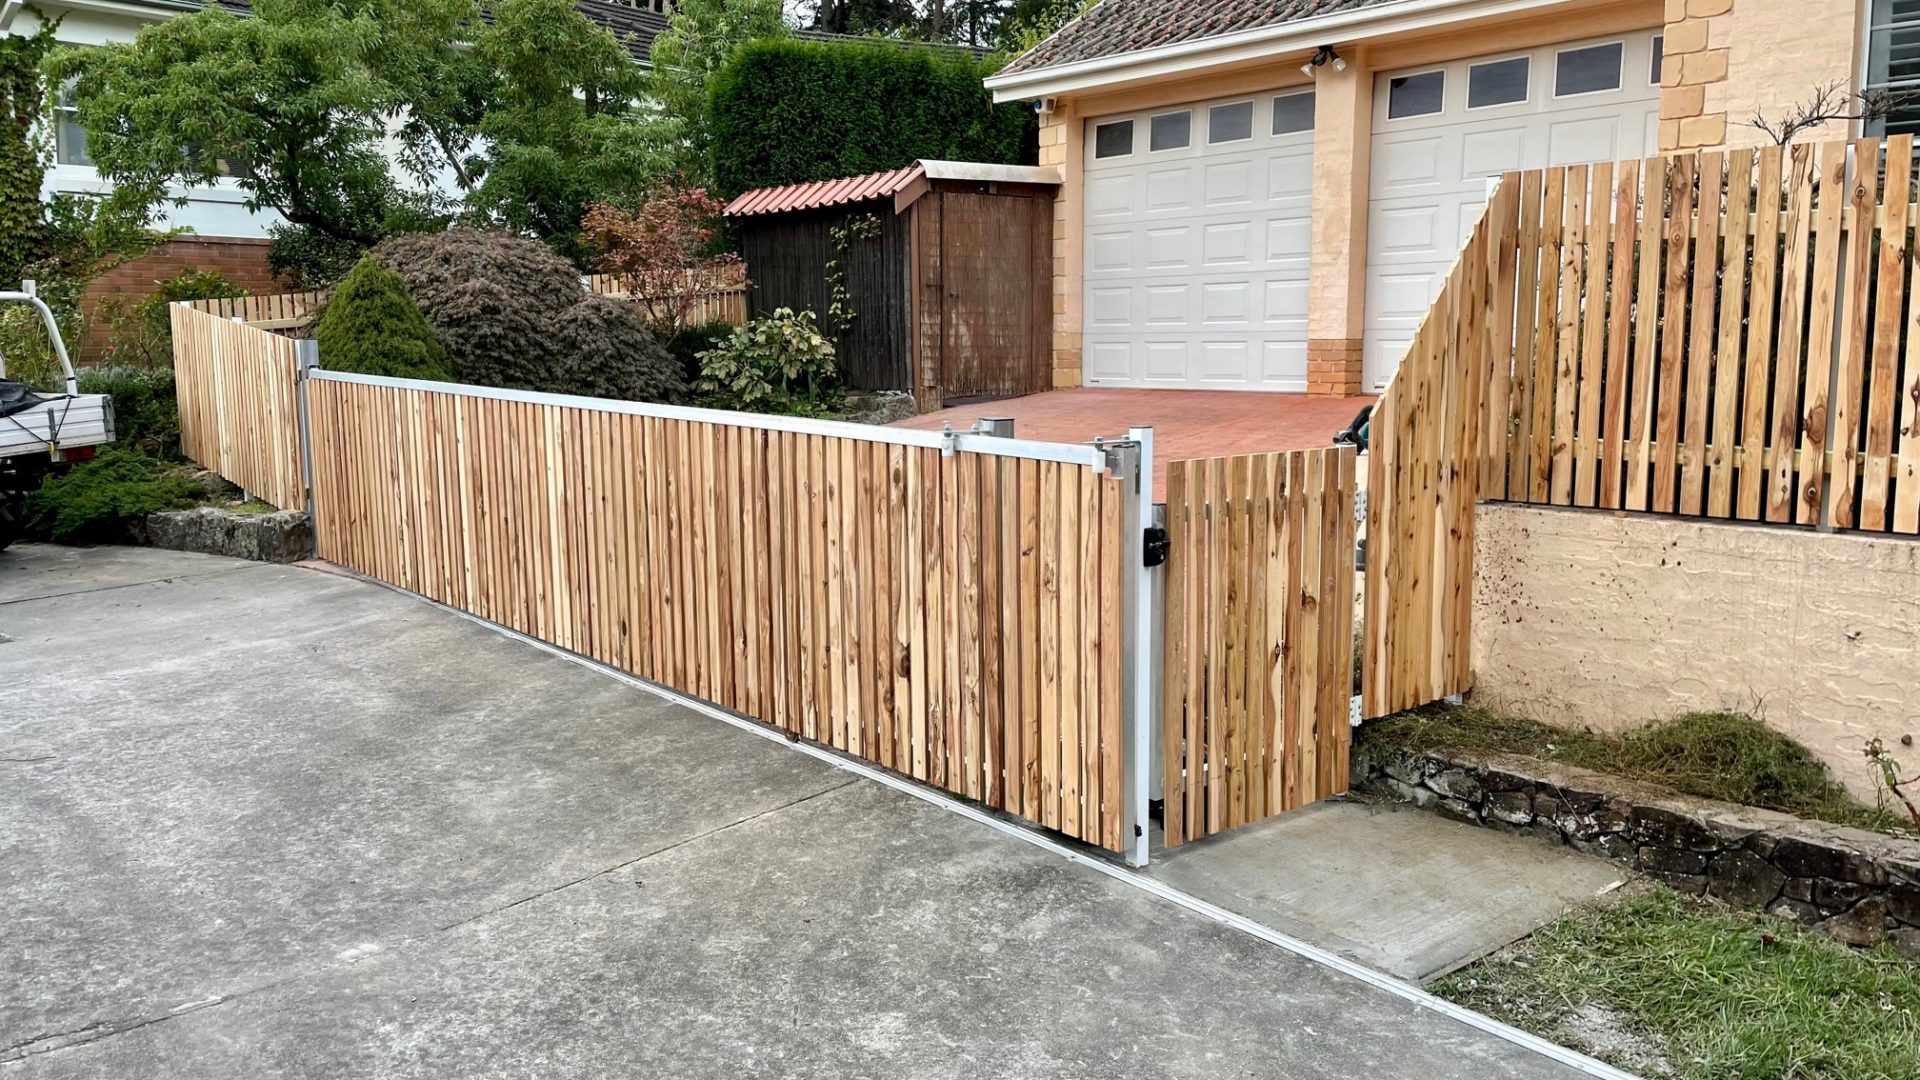 Cypress Pine picket fence with Automatic Gate